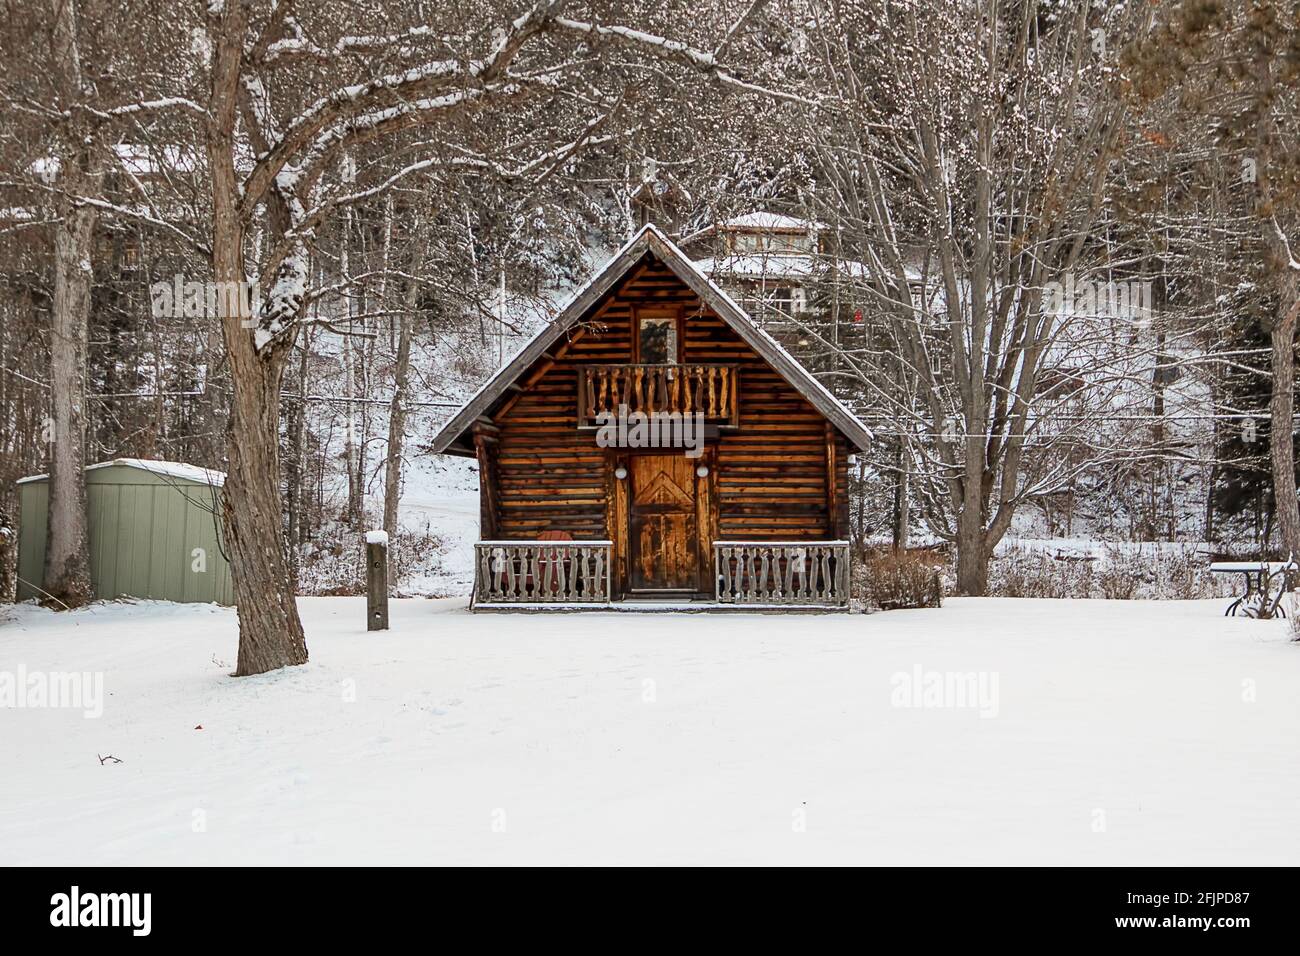 A garden shed built to look like a log cabin - winter snow scene Stock Photo